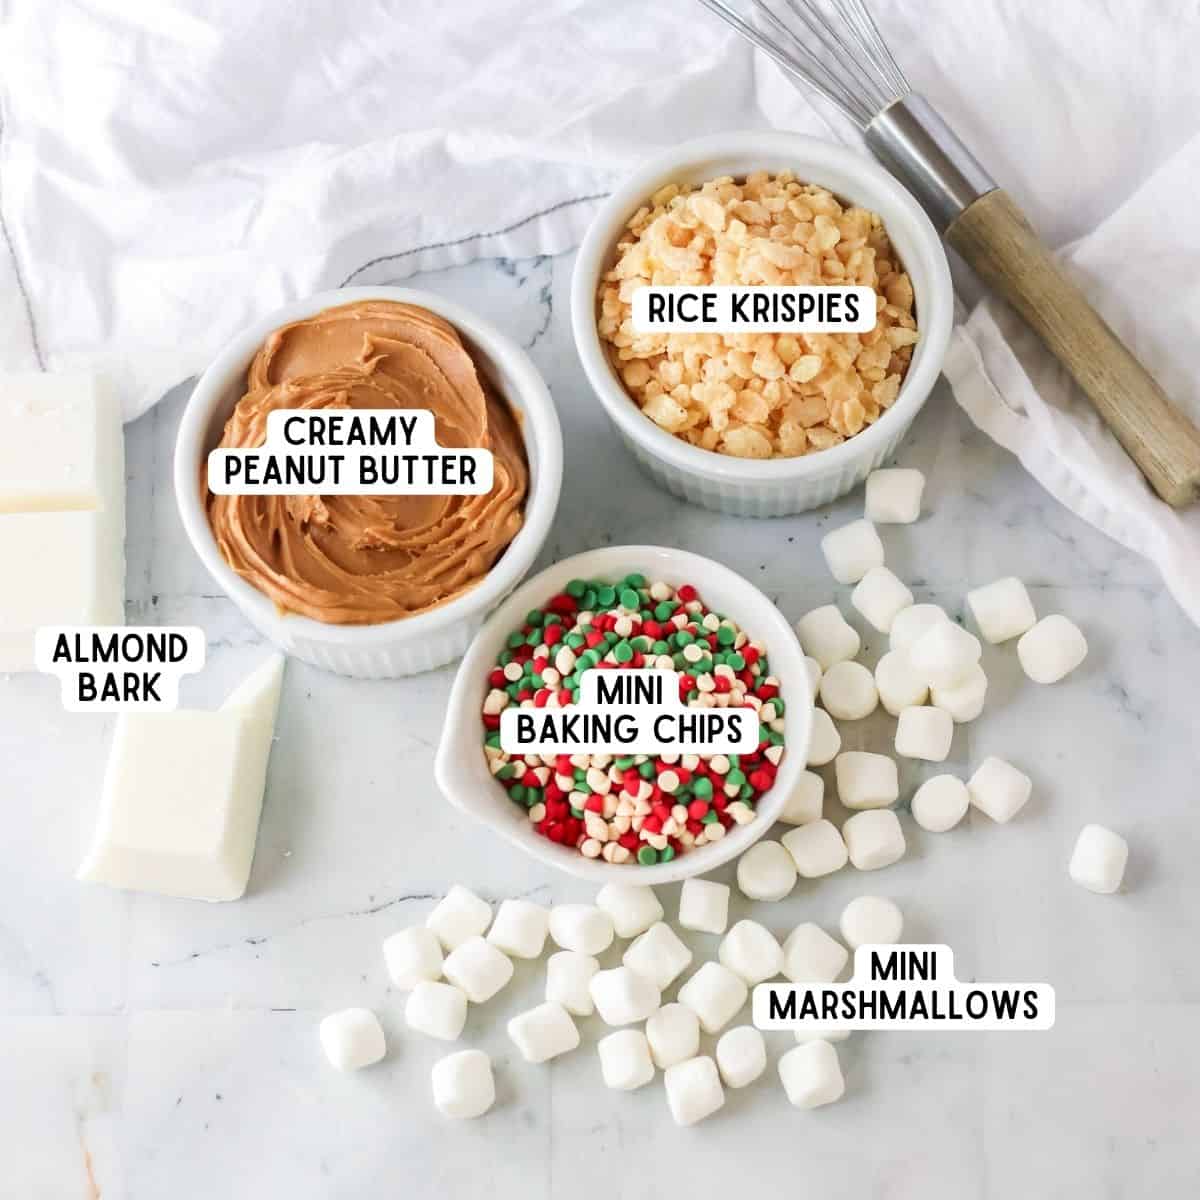 Ingredients for no bake slow cooker avalanche cookies: mini marshmallows, creamy peanut butter, almond bark, rice cereal, holiday mini chips.